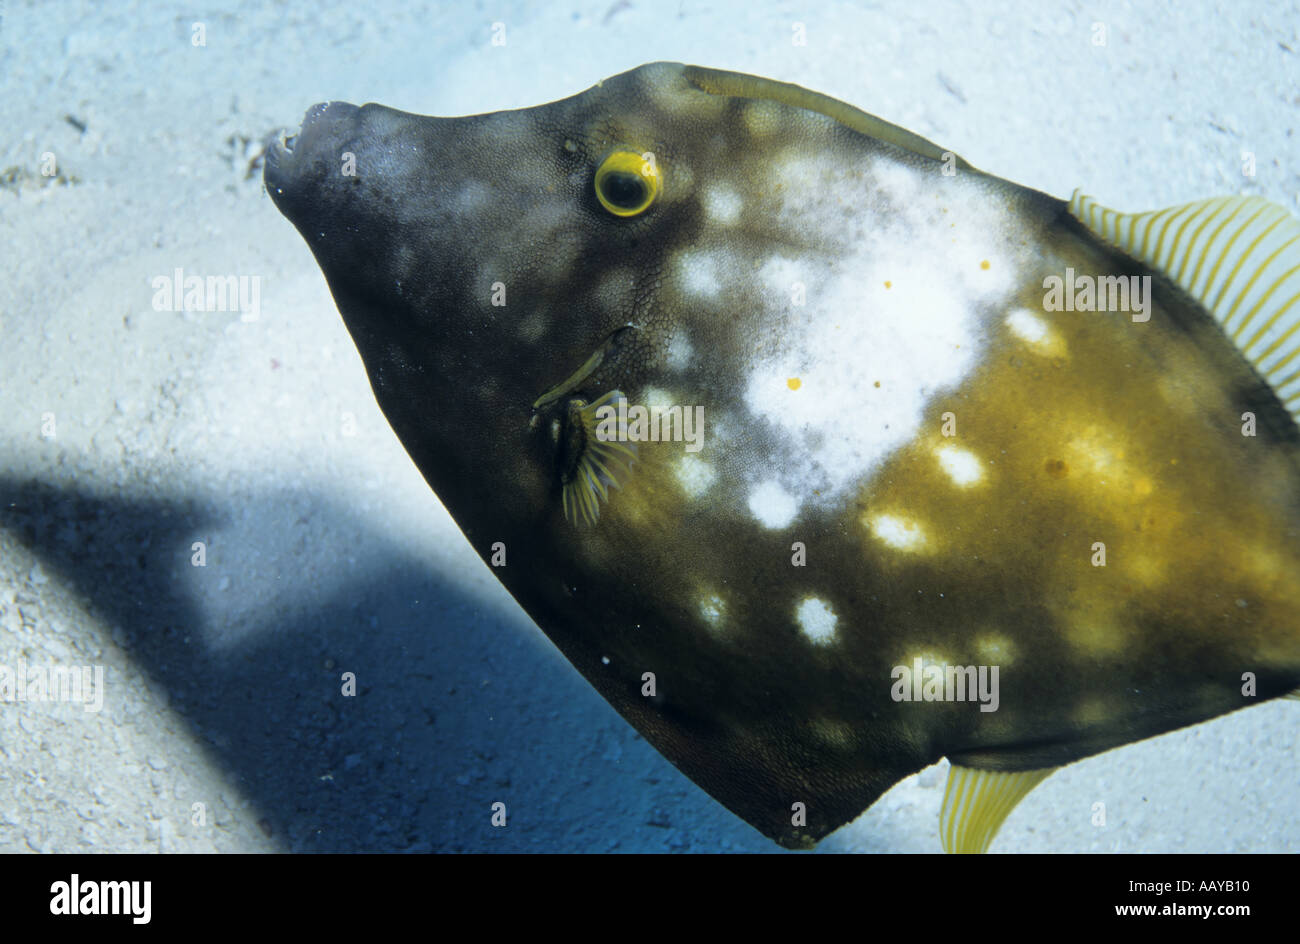 Whitespotted Filefish (Cantherhines macrocerus) swimming through tropical waters, Paraiso, Cozumel Island, Mexico. Stock Photo